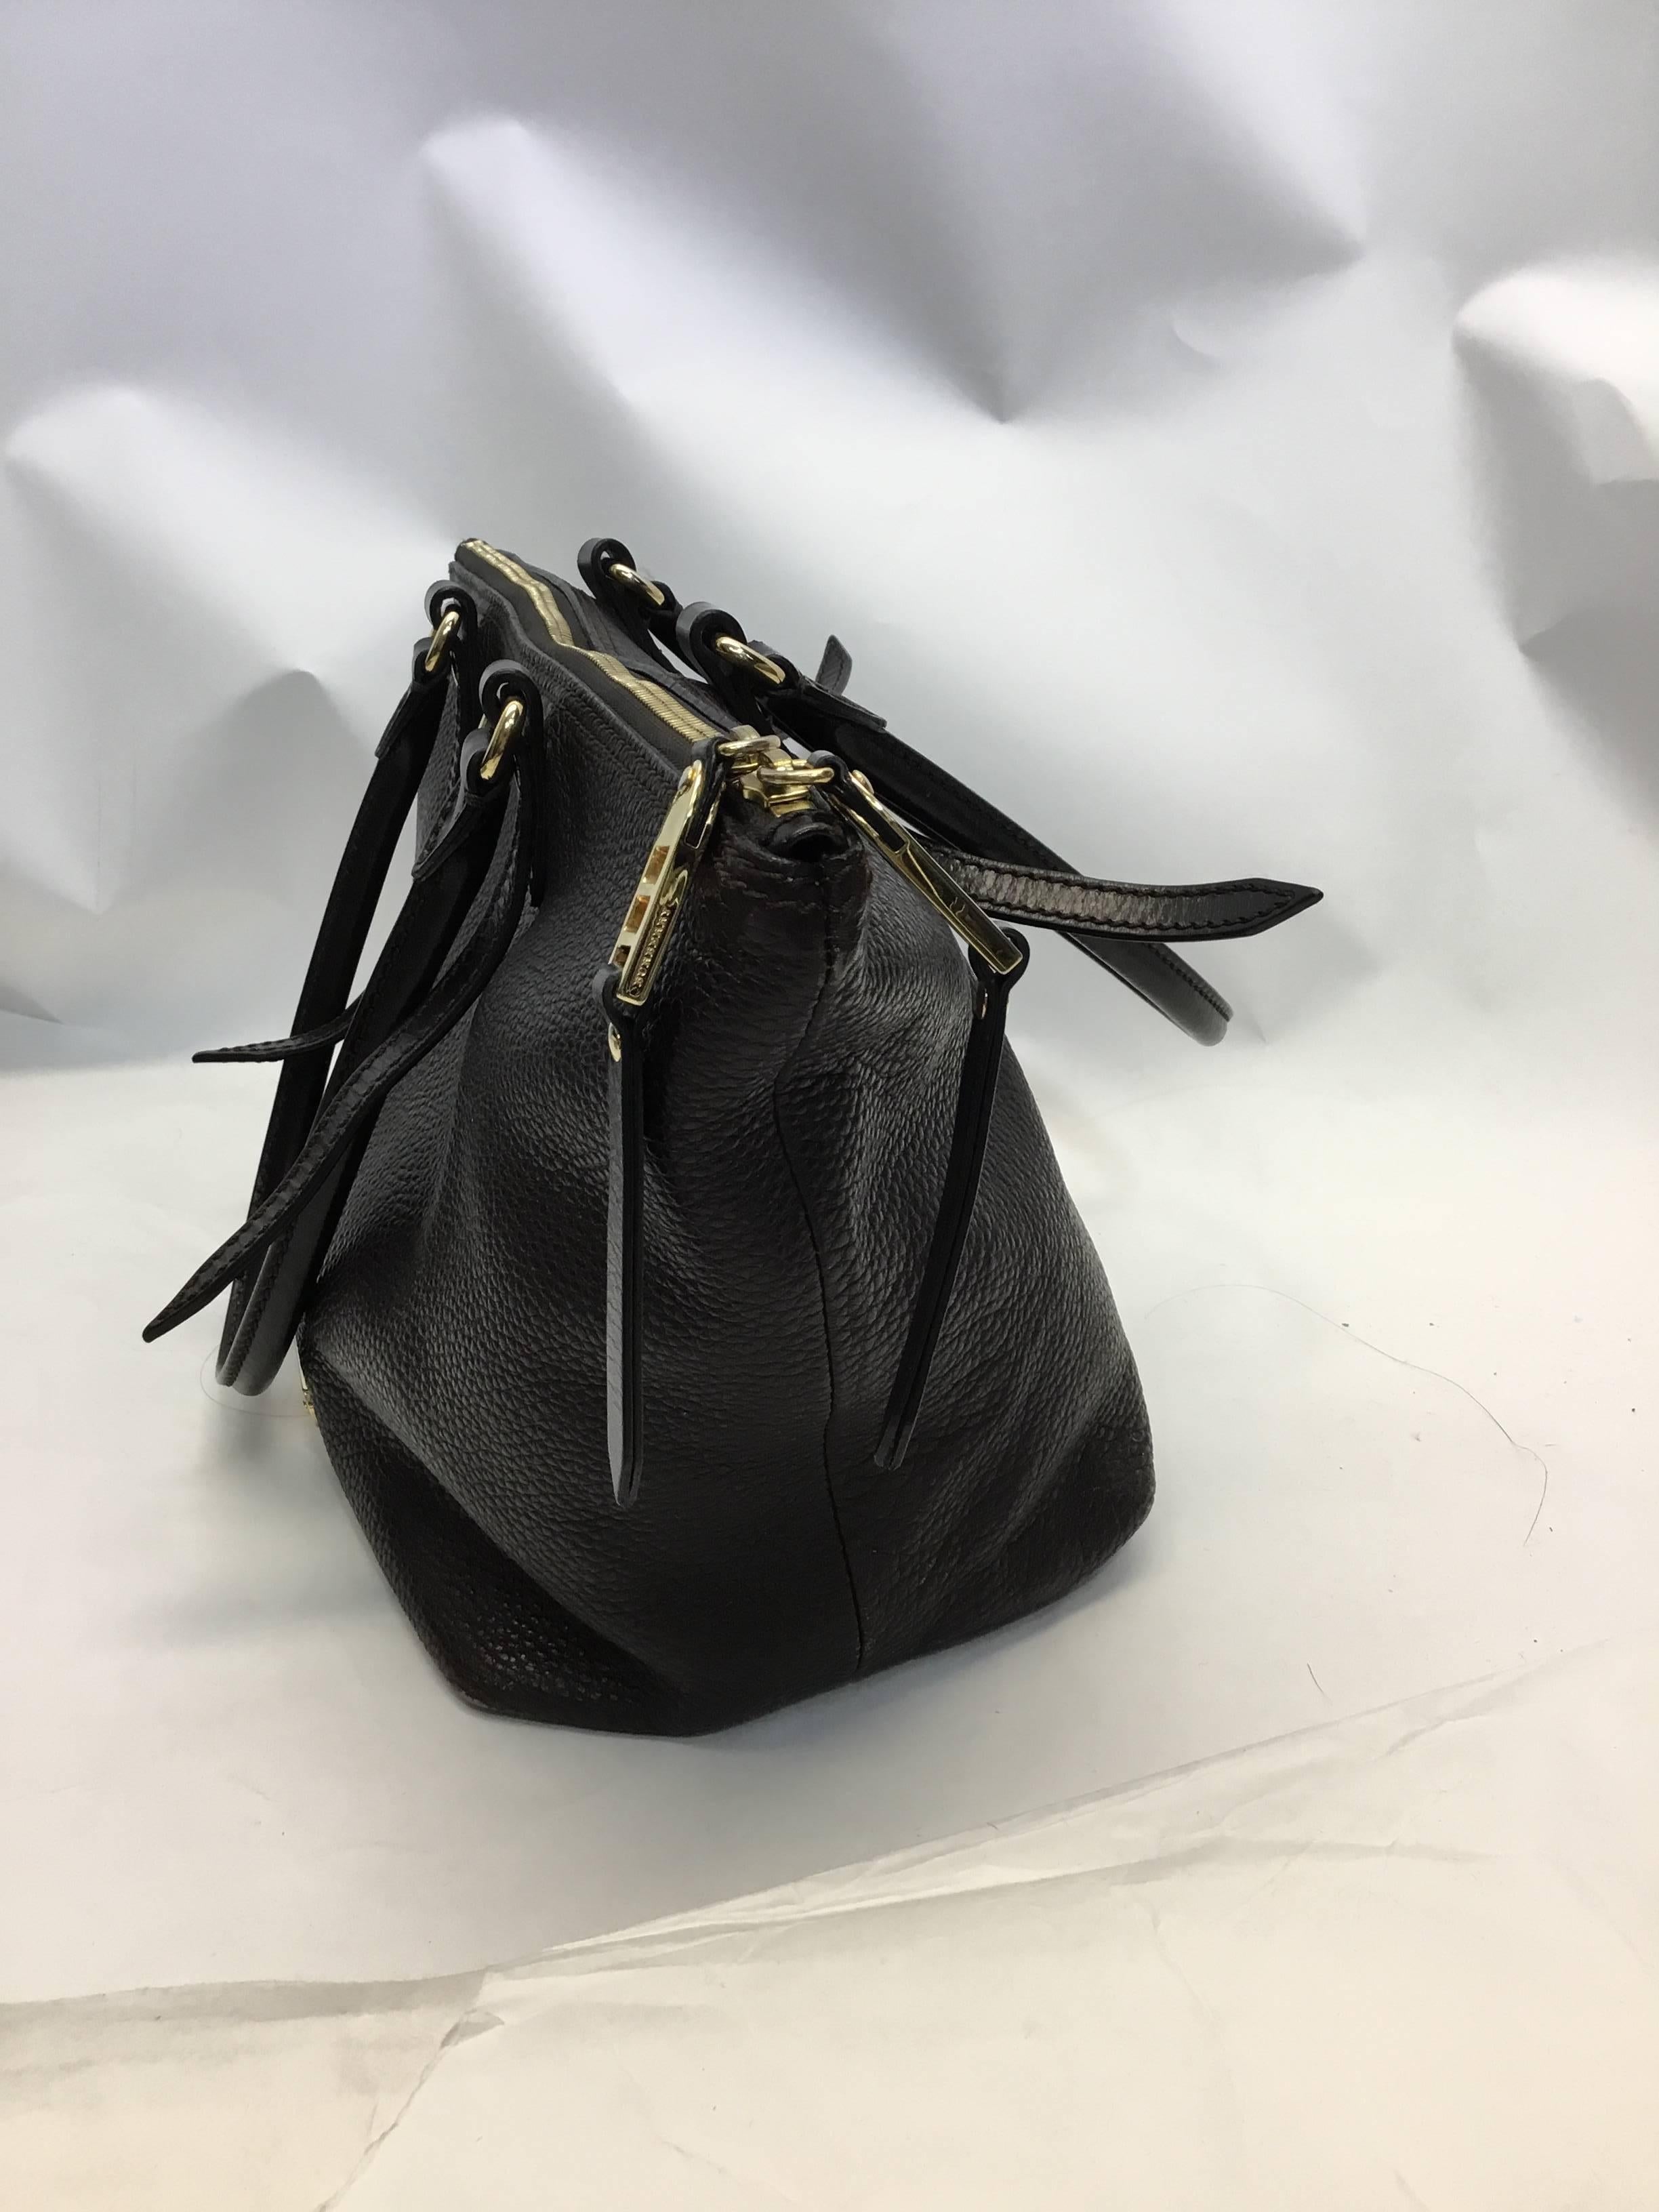 Burberry Brown Leather Zip Tote
$499
Gold toned hardware, center zip closure
Minor signs of wear on the bottom corner - see photo
Interior in classic burberry plaid pattern
